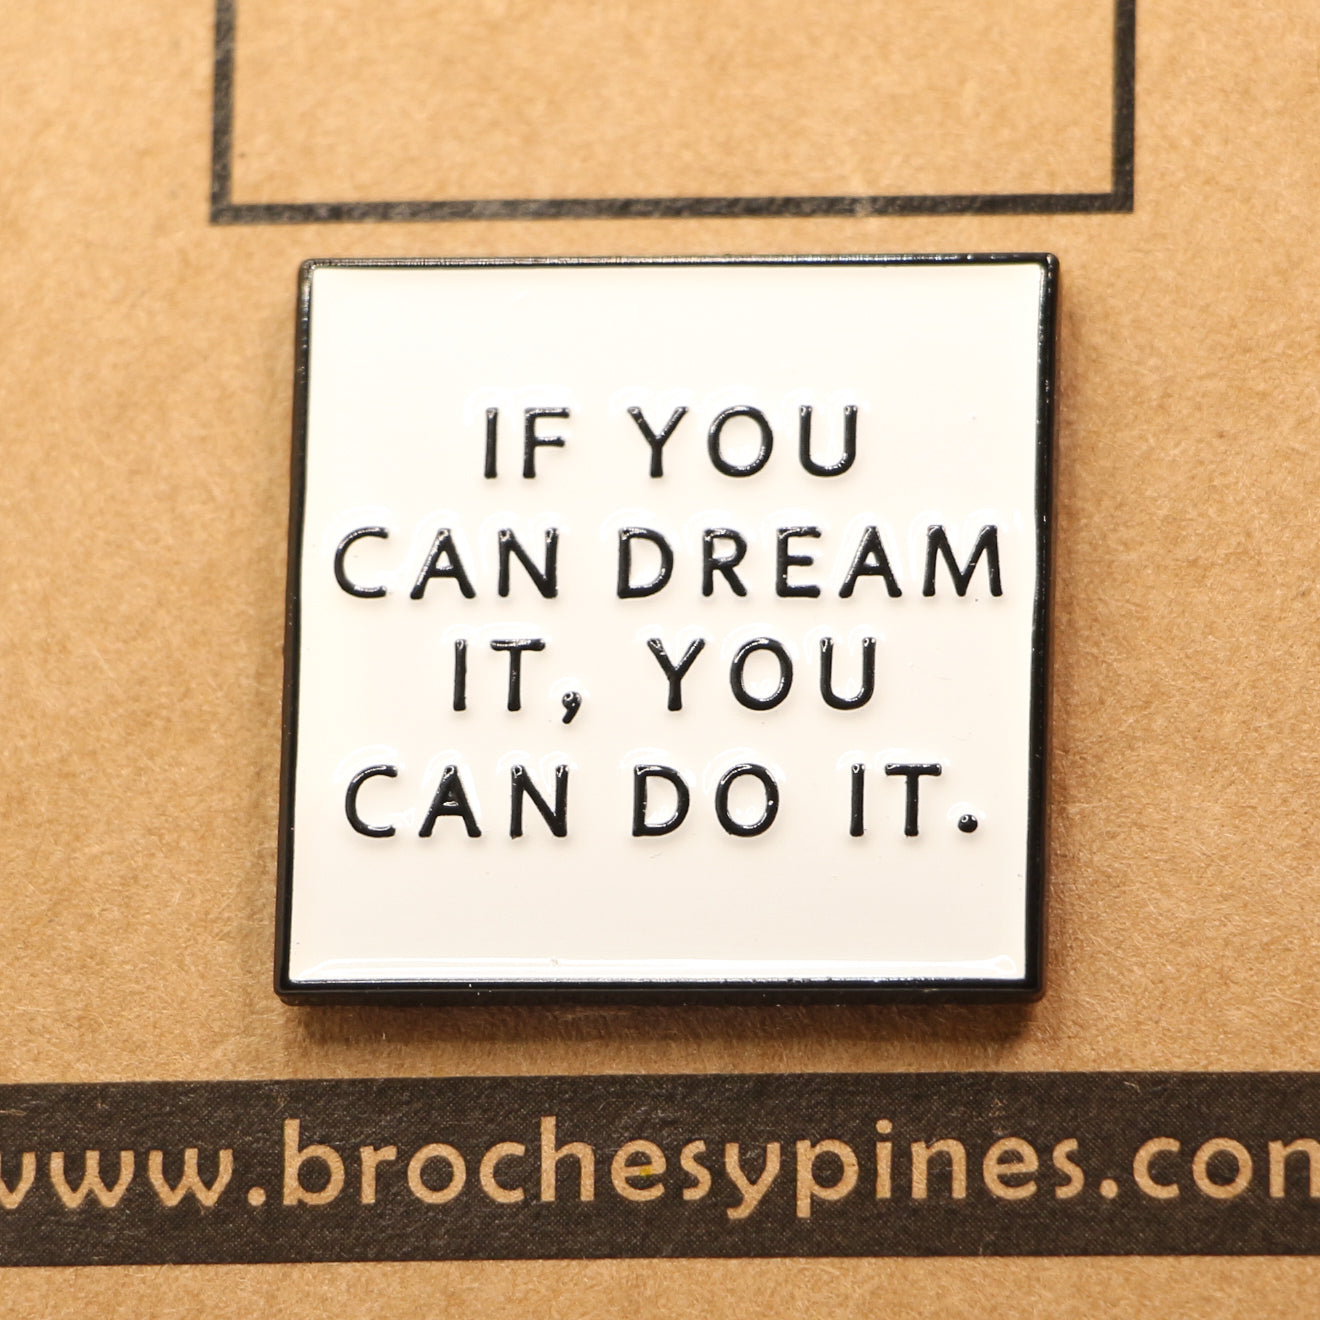 Pin "If You Can Dream It, You Can Do It" - Frases